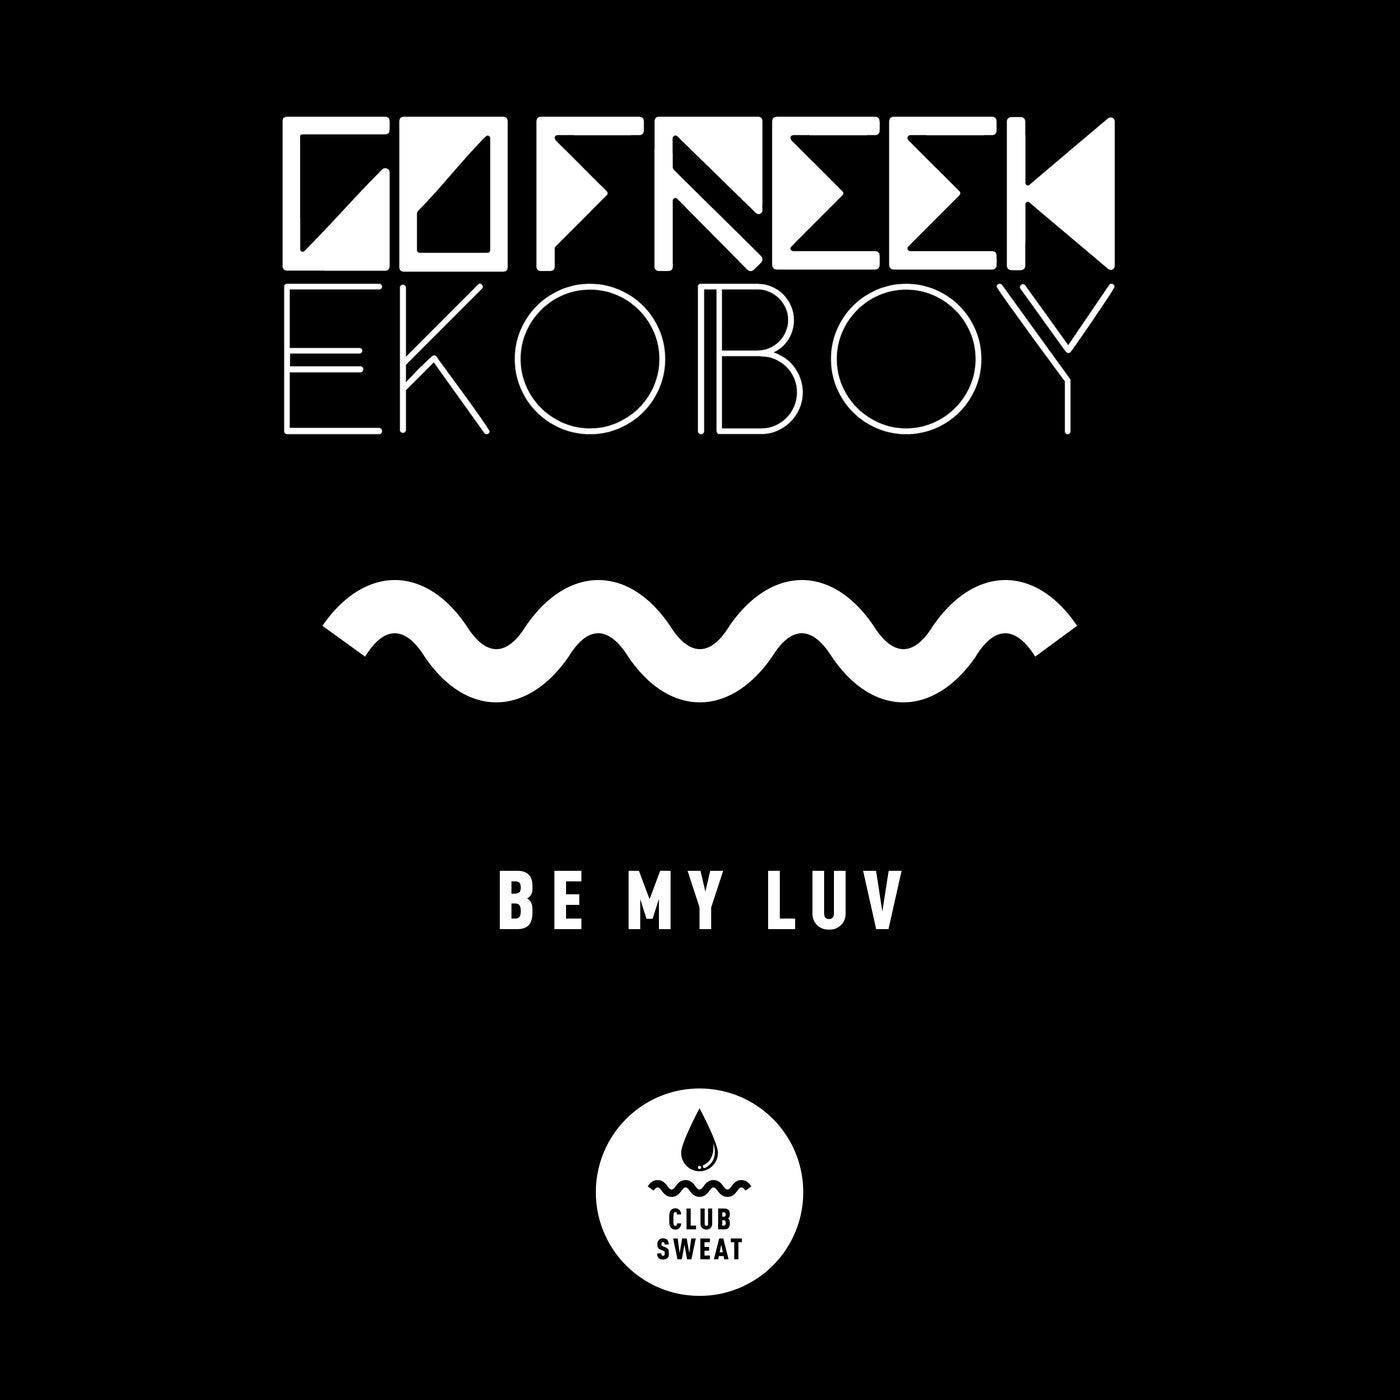 Go Freek, Ekoboy – Be My Luv (Extended Mix) [CLUBSWE338]